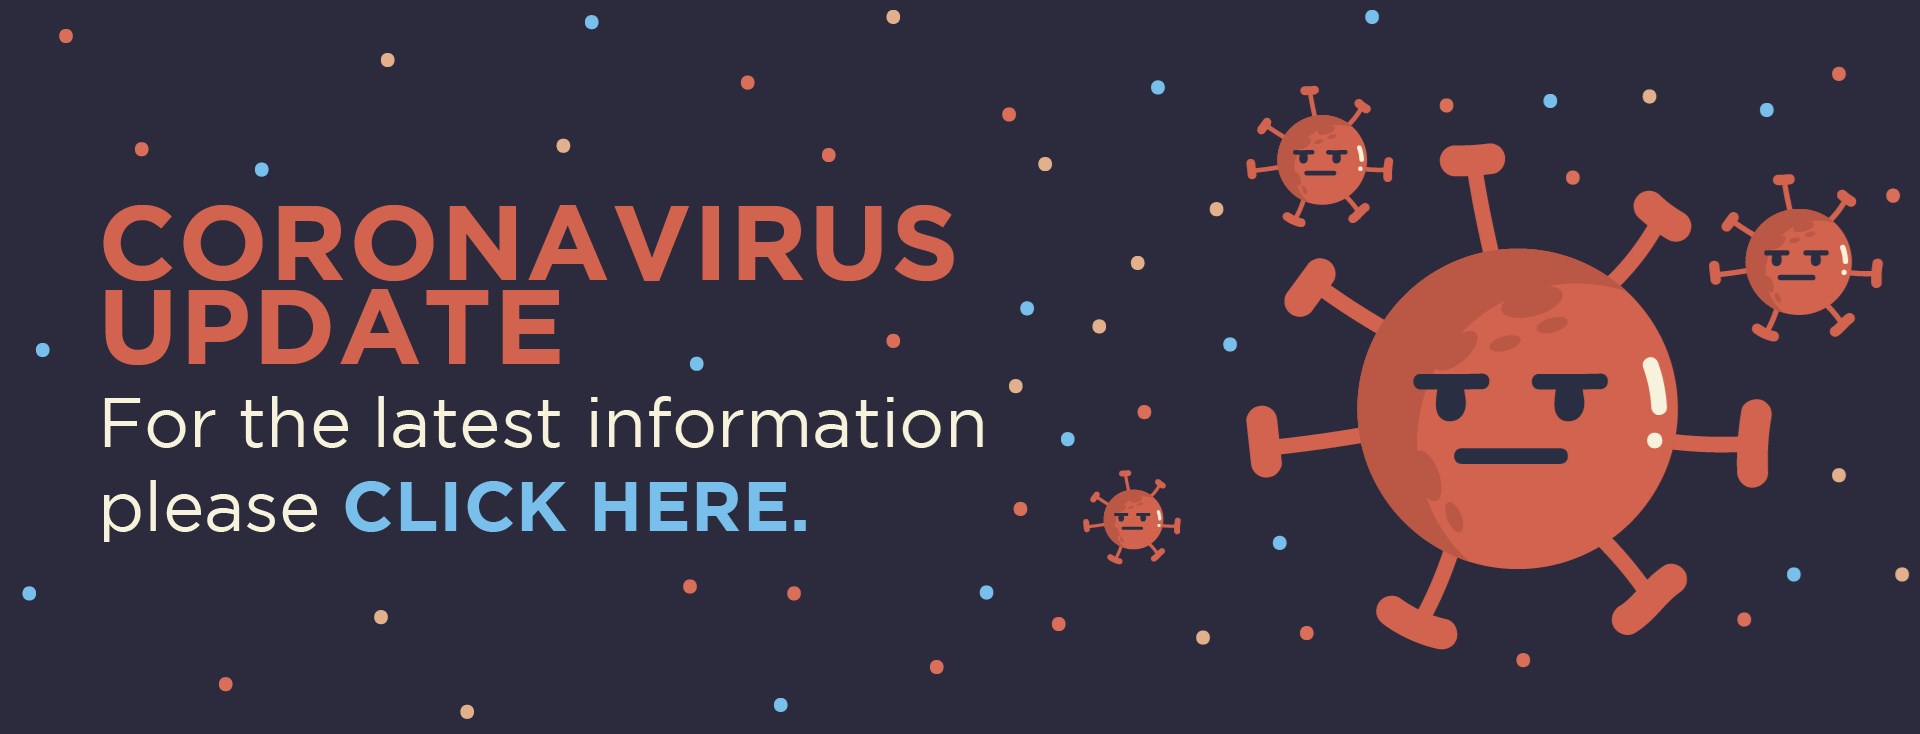 Slide containing a cartoon virus image with accompanying text: Coronavirus update for the latest information please click here.